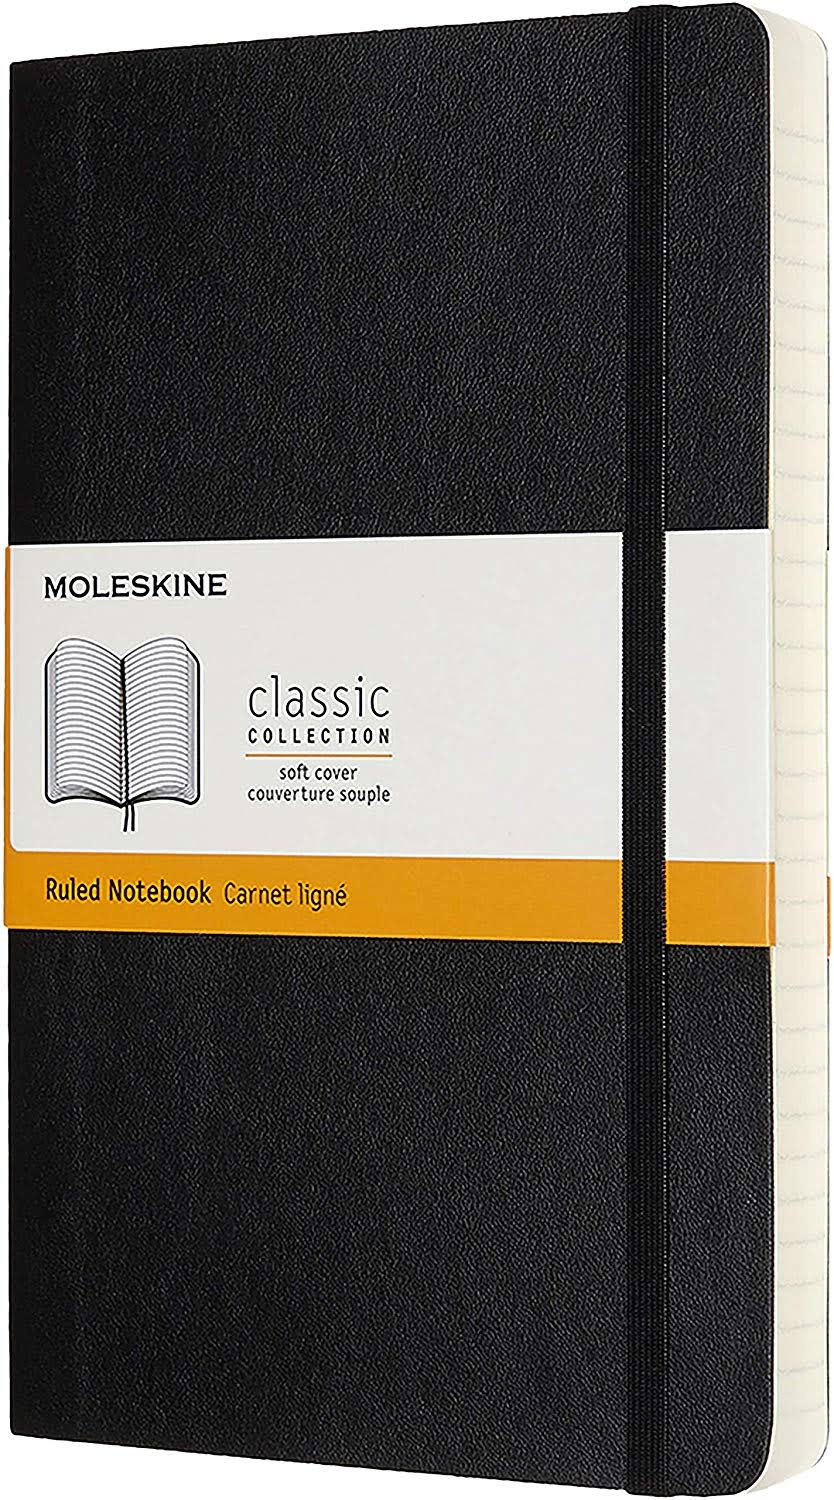 Moleskine Classic Large Soft Cover Expanded Notebook Ruled / Black